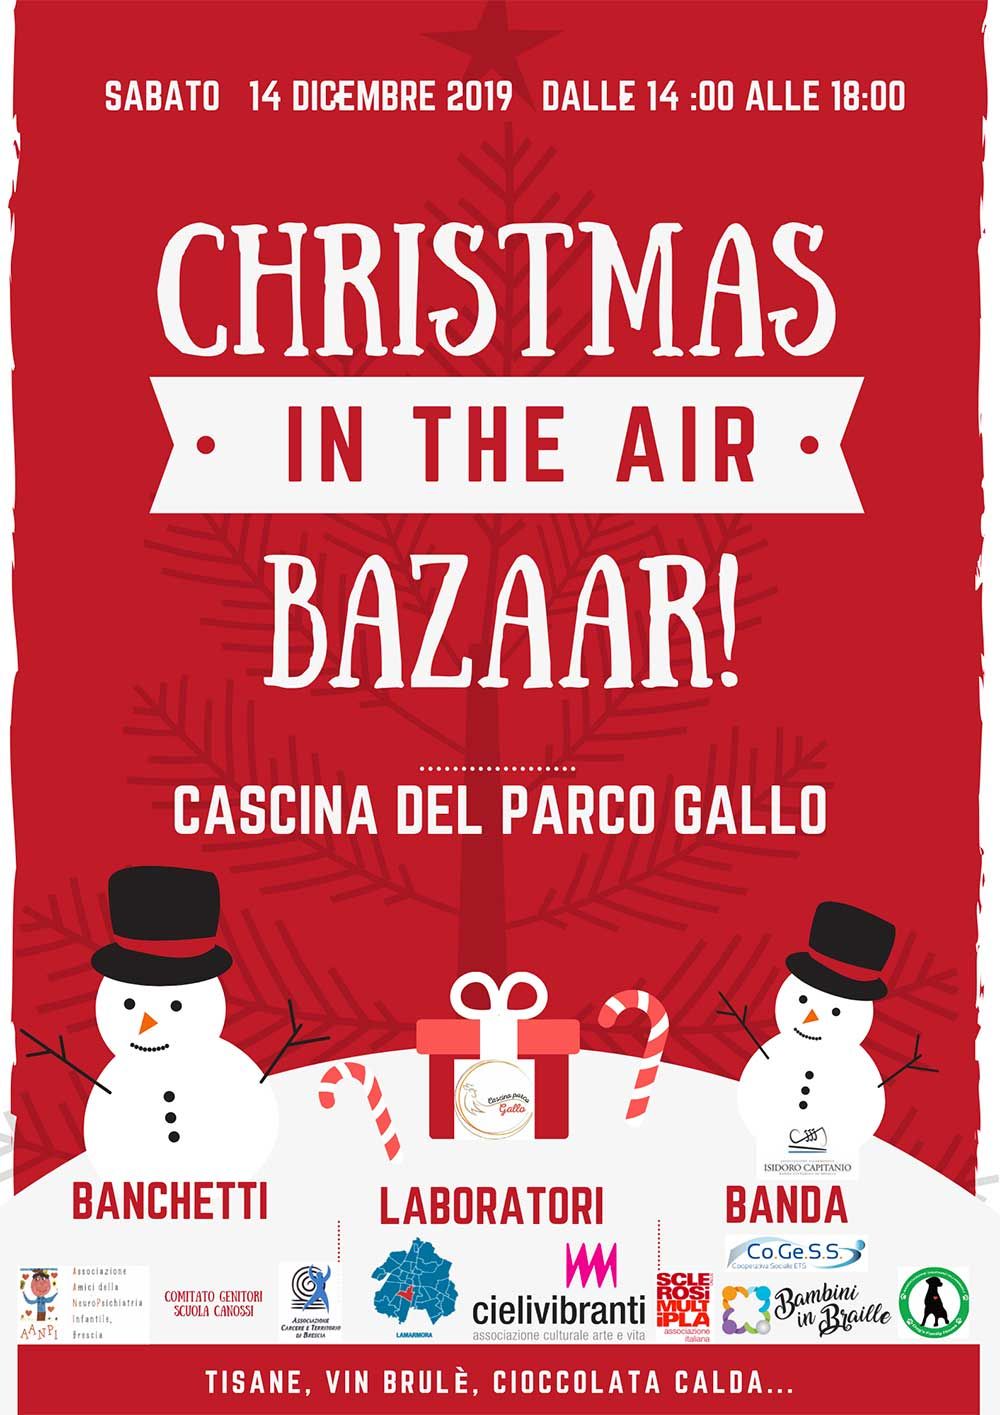 chistmas-is-the-air-brescia-parco-gallo-2019